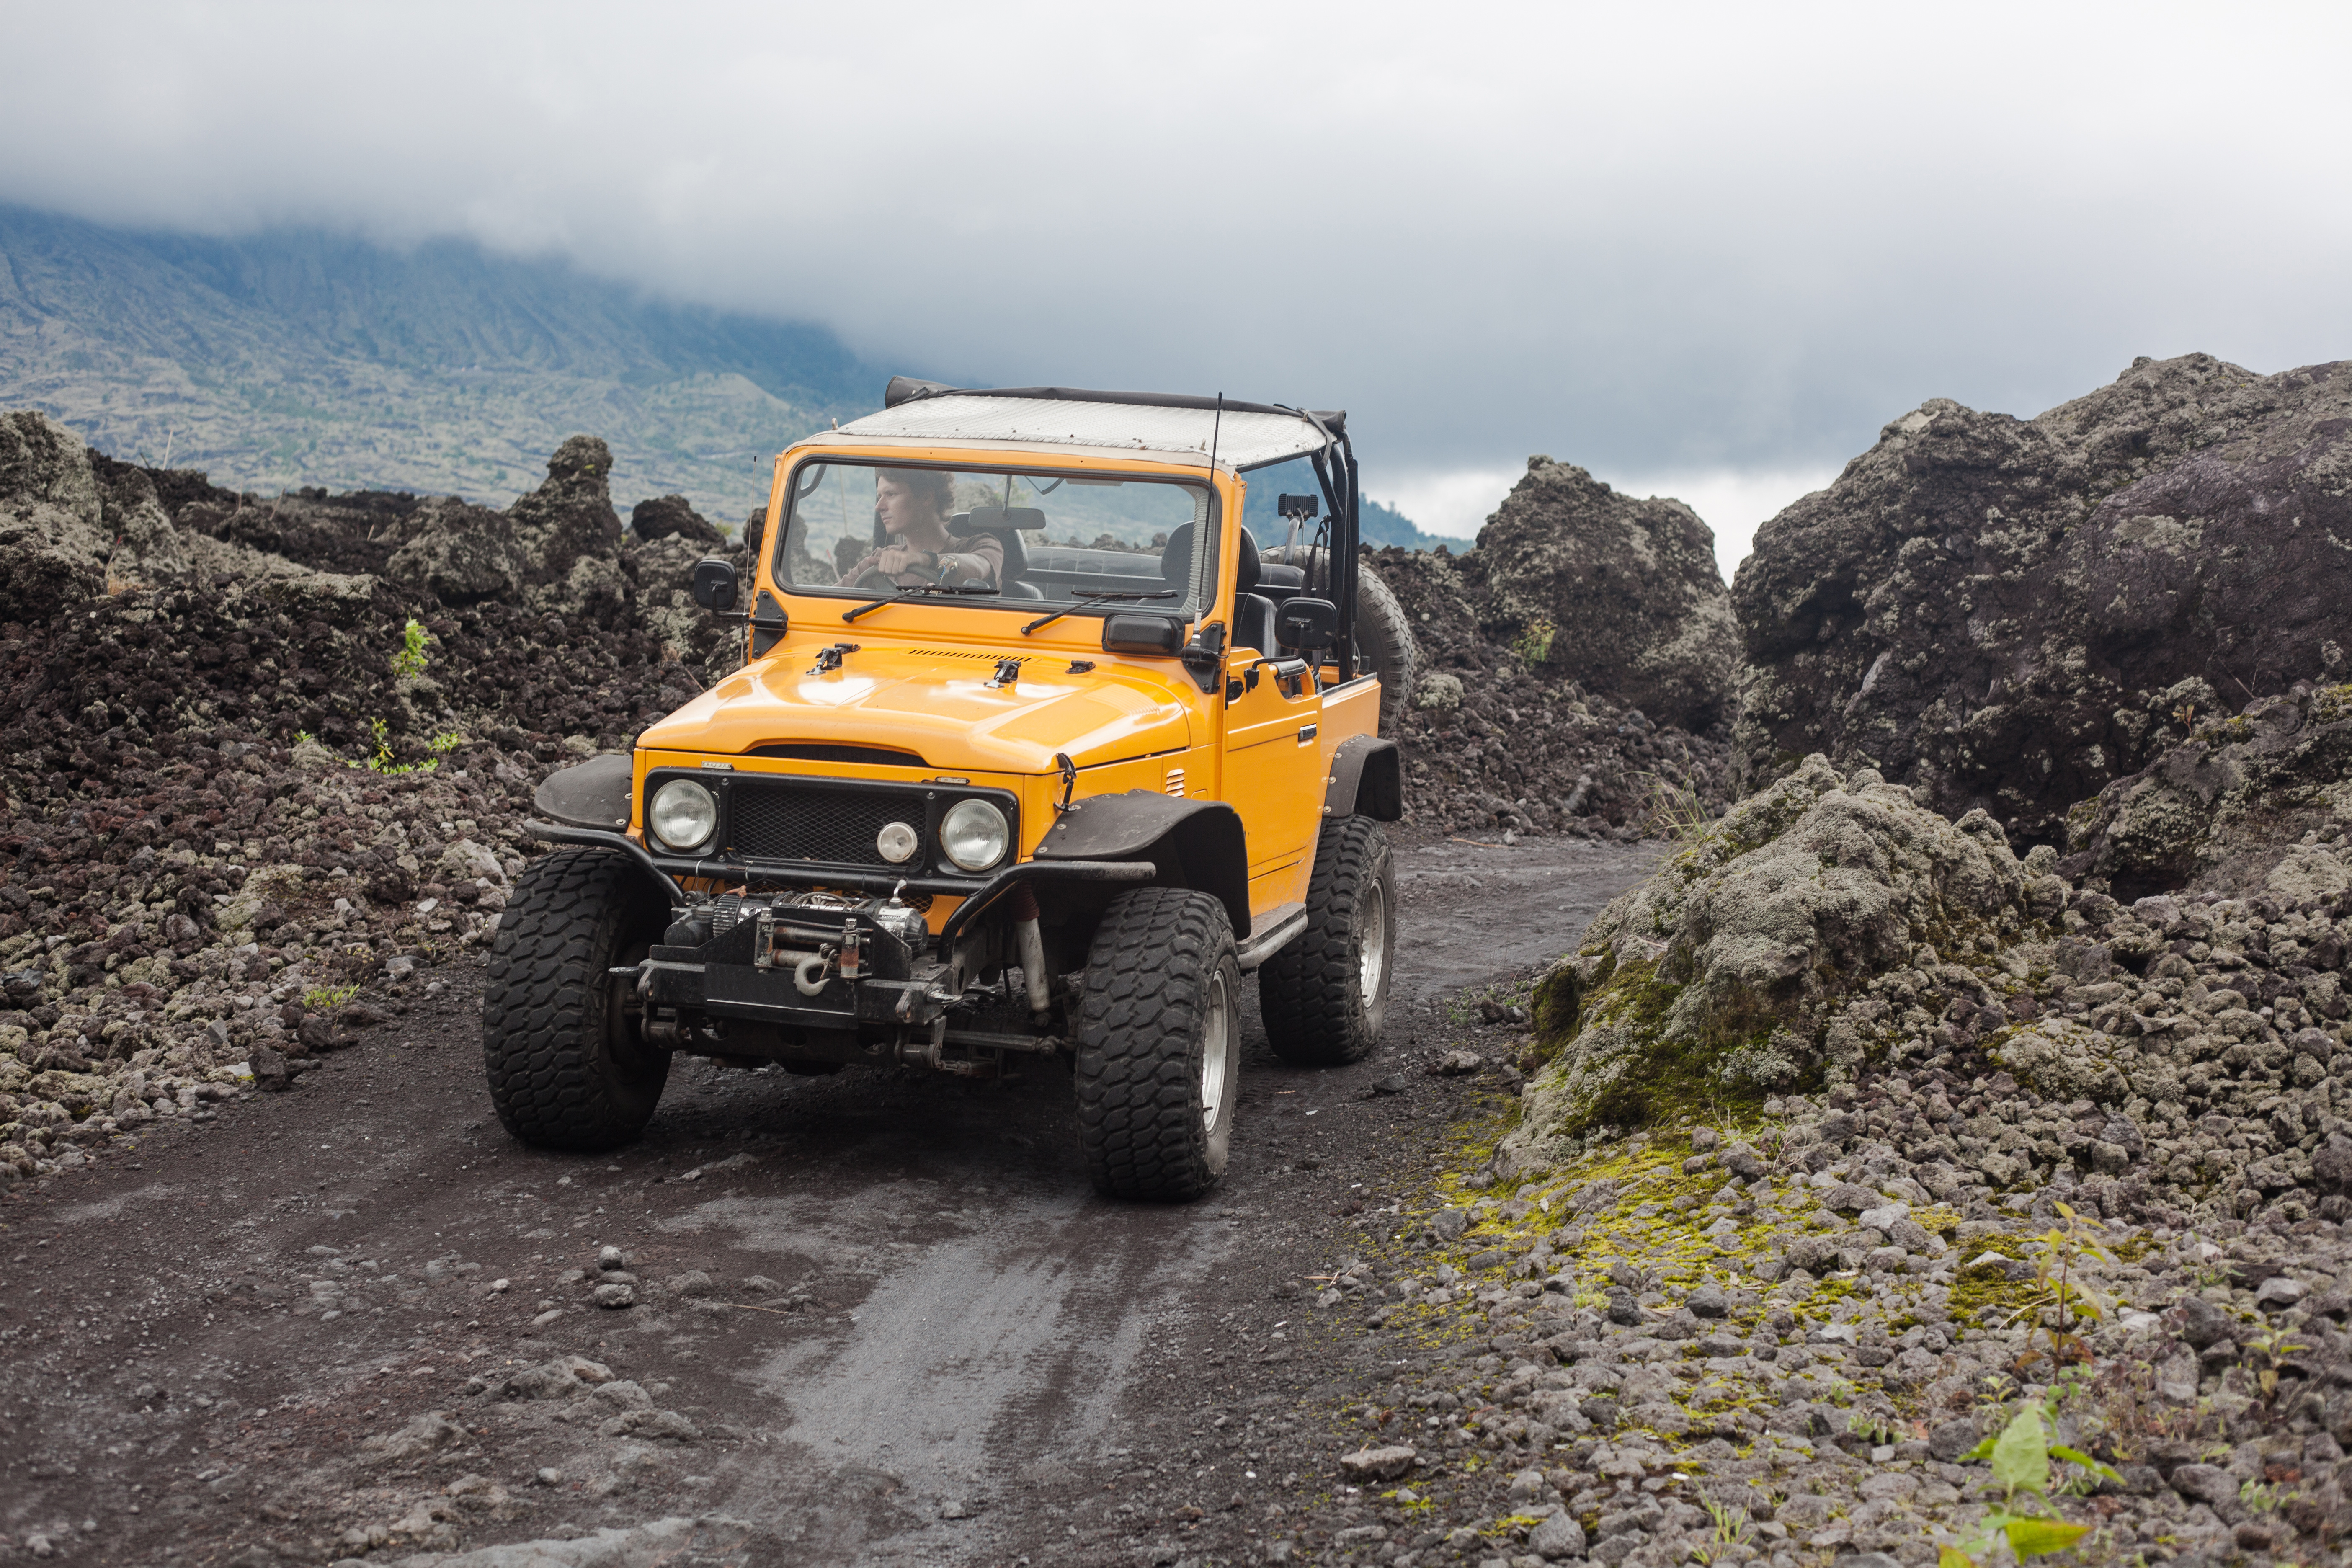 off road vehicle on rocky road